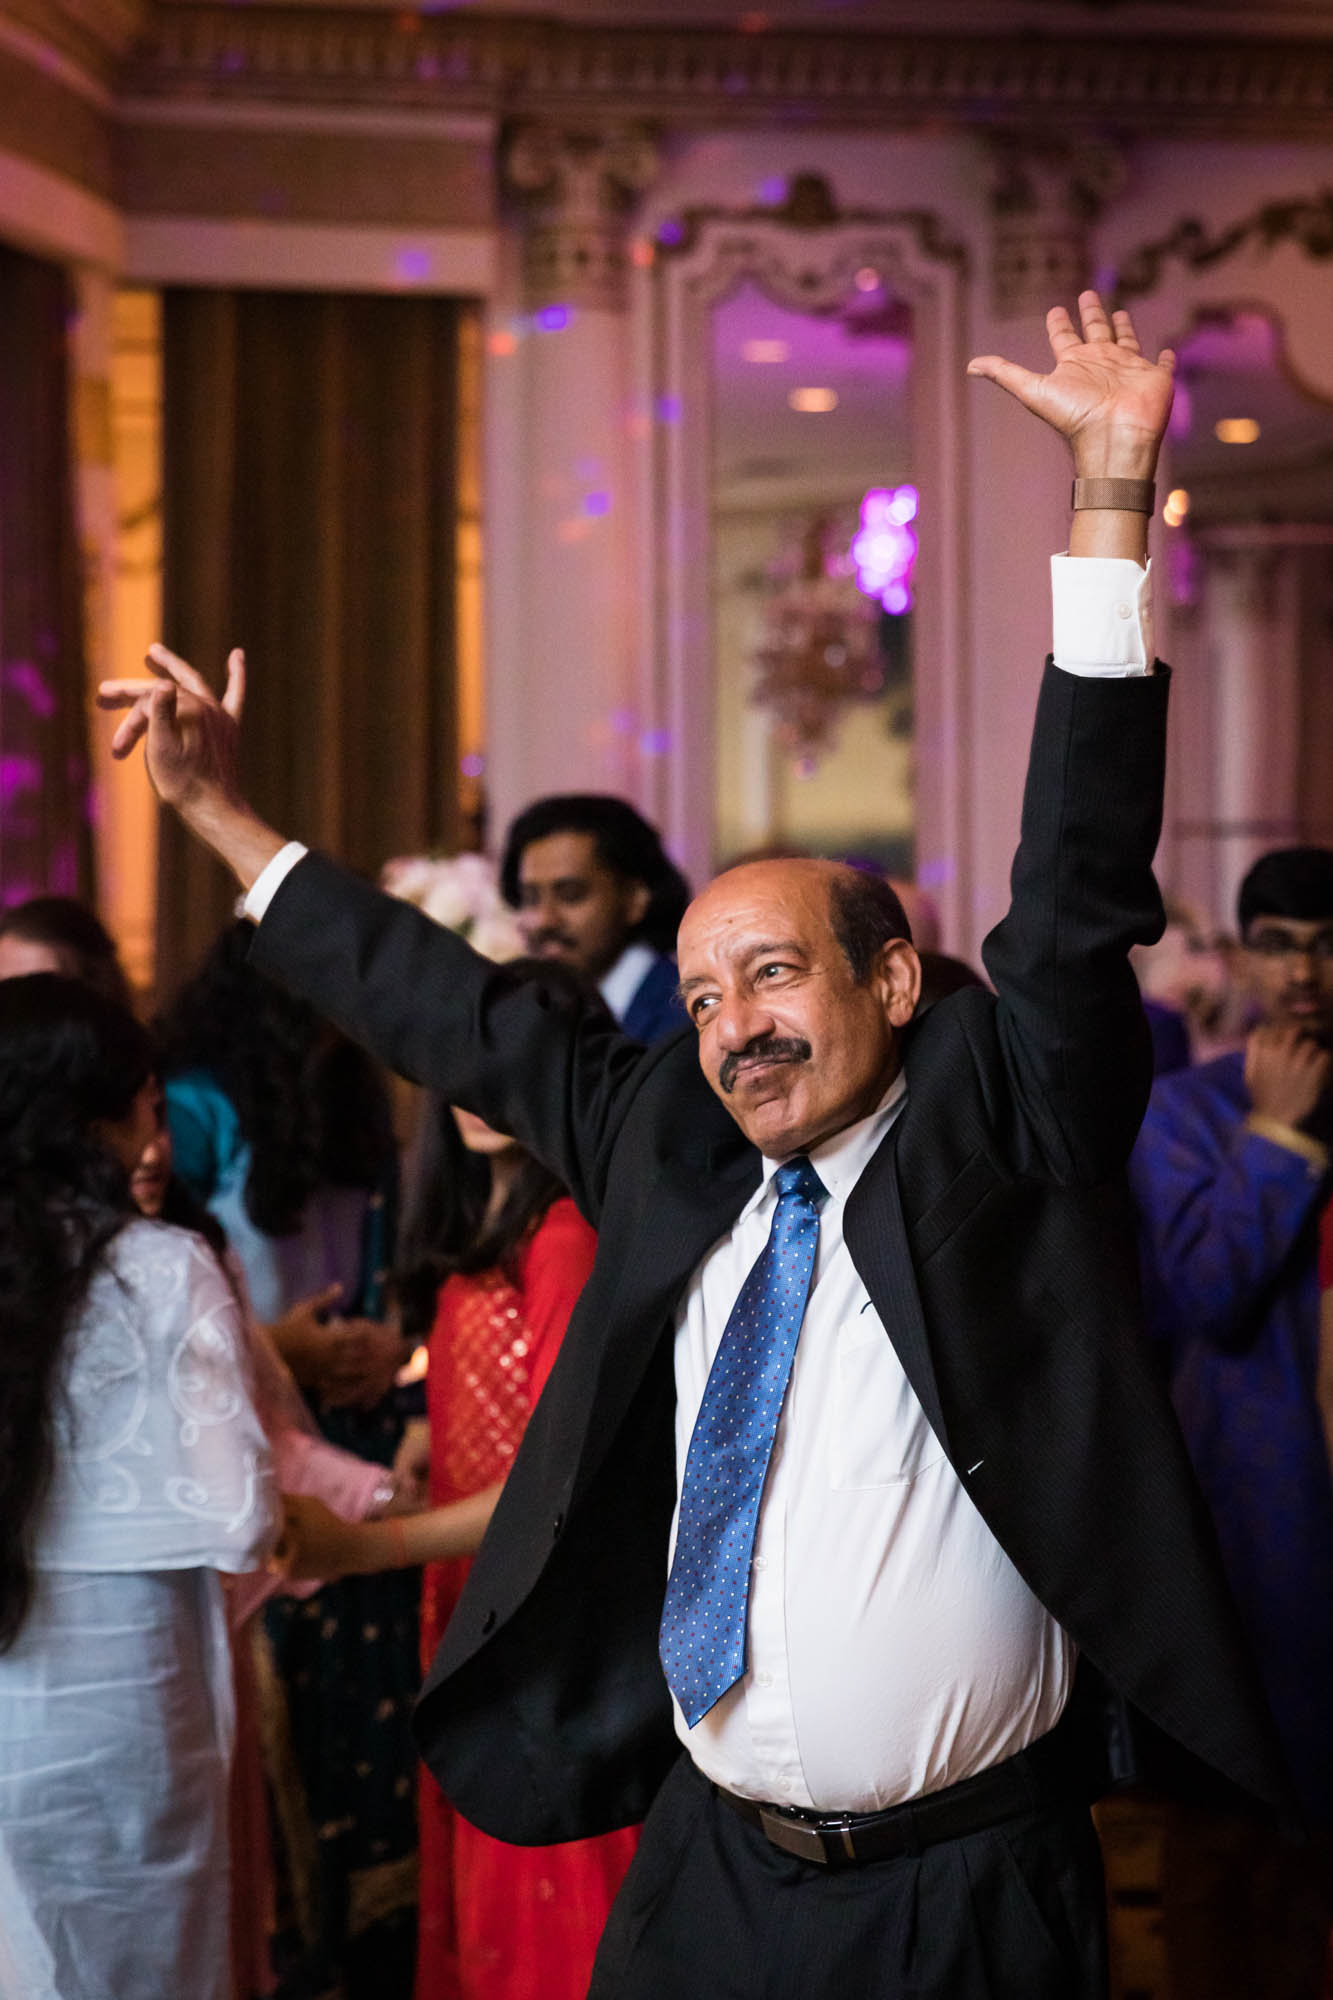 Bald Indian man wearing black suit and blue tie dancing with arms raised overhead for an article on Terrace on the Park wedding photo tips